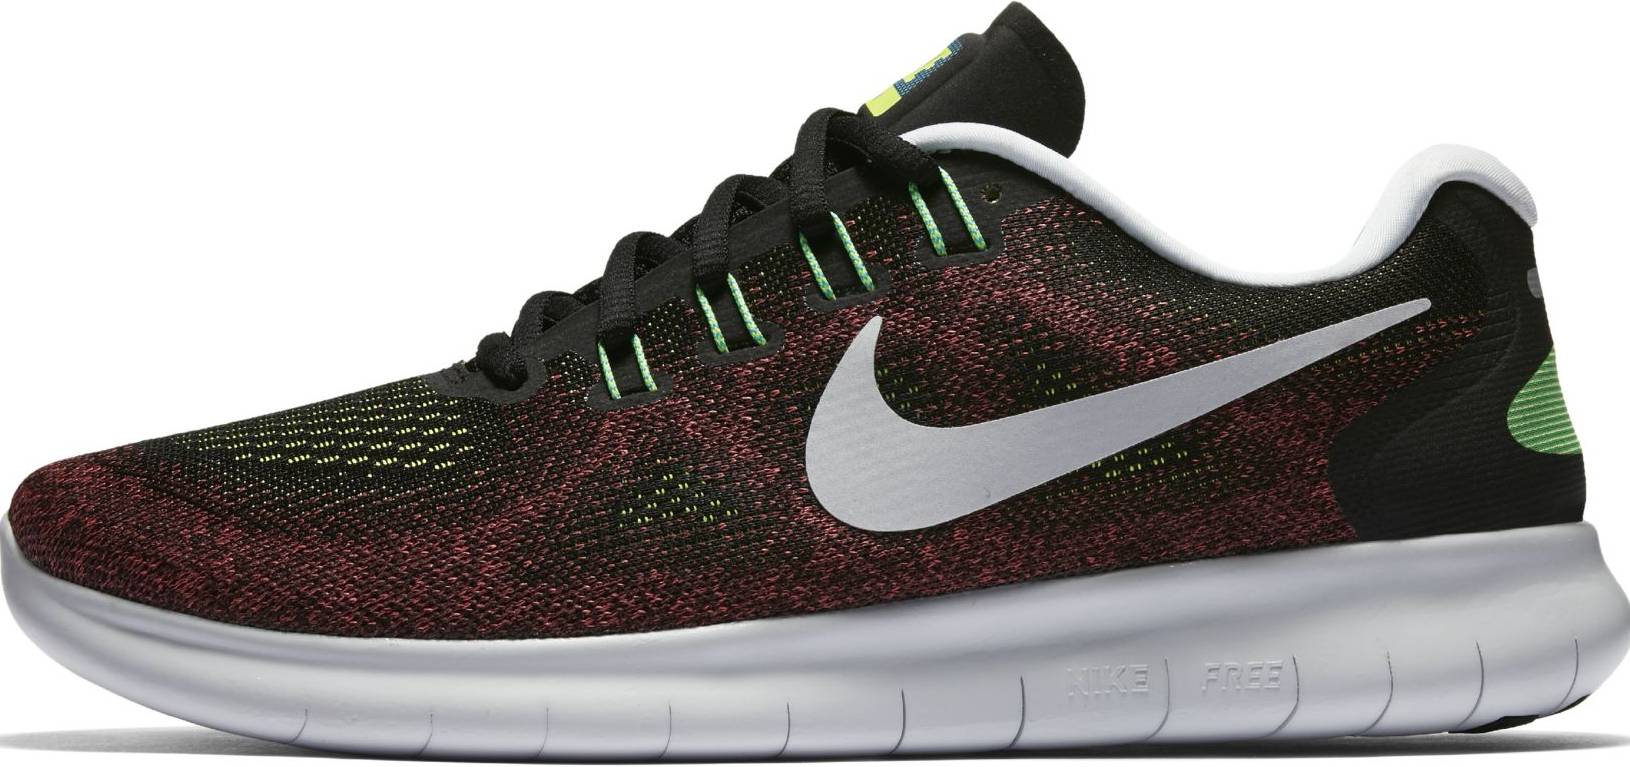 Nike Free RN Review Facts, |